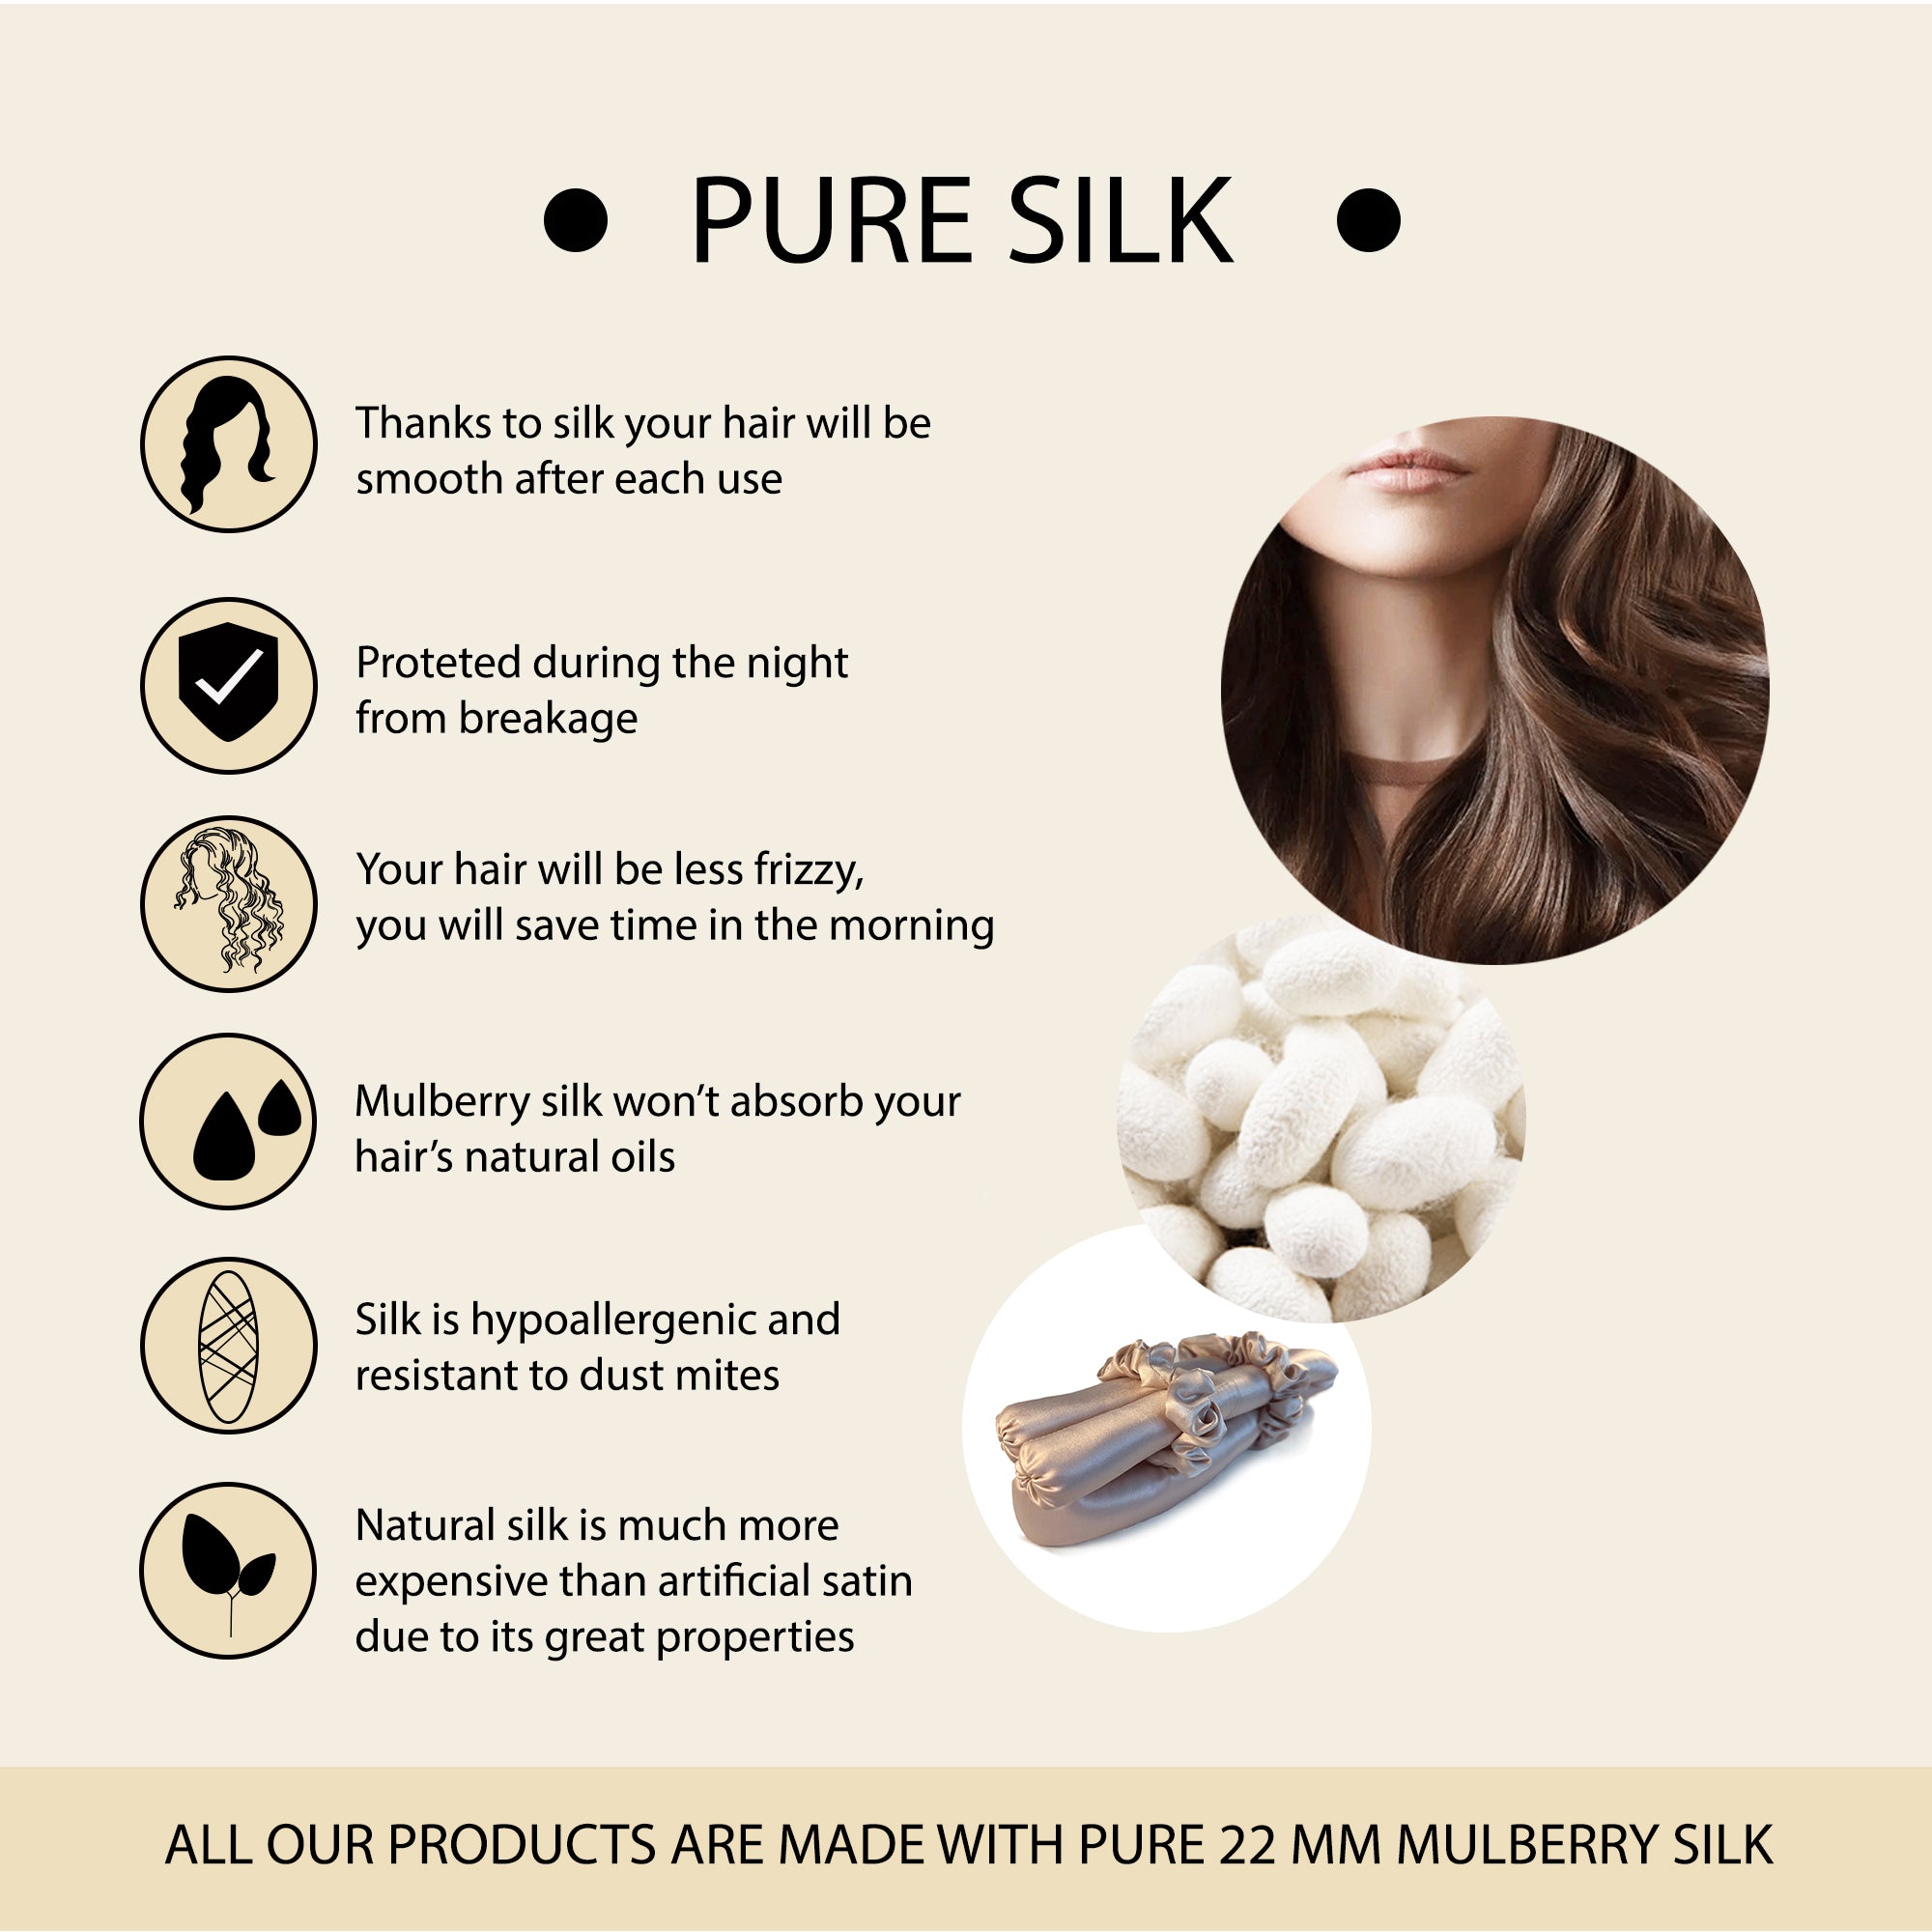 Promote Hair Health Overnight: The Benefits of Wearing a Pure Mulberry